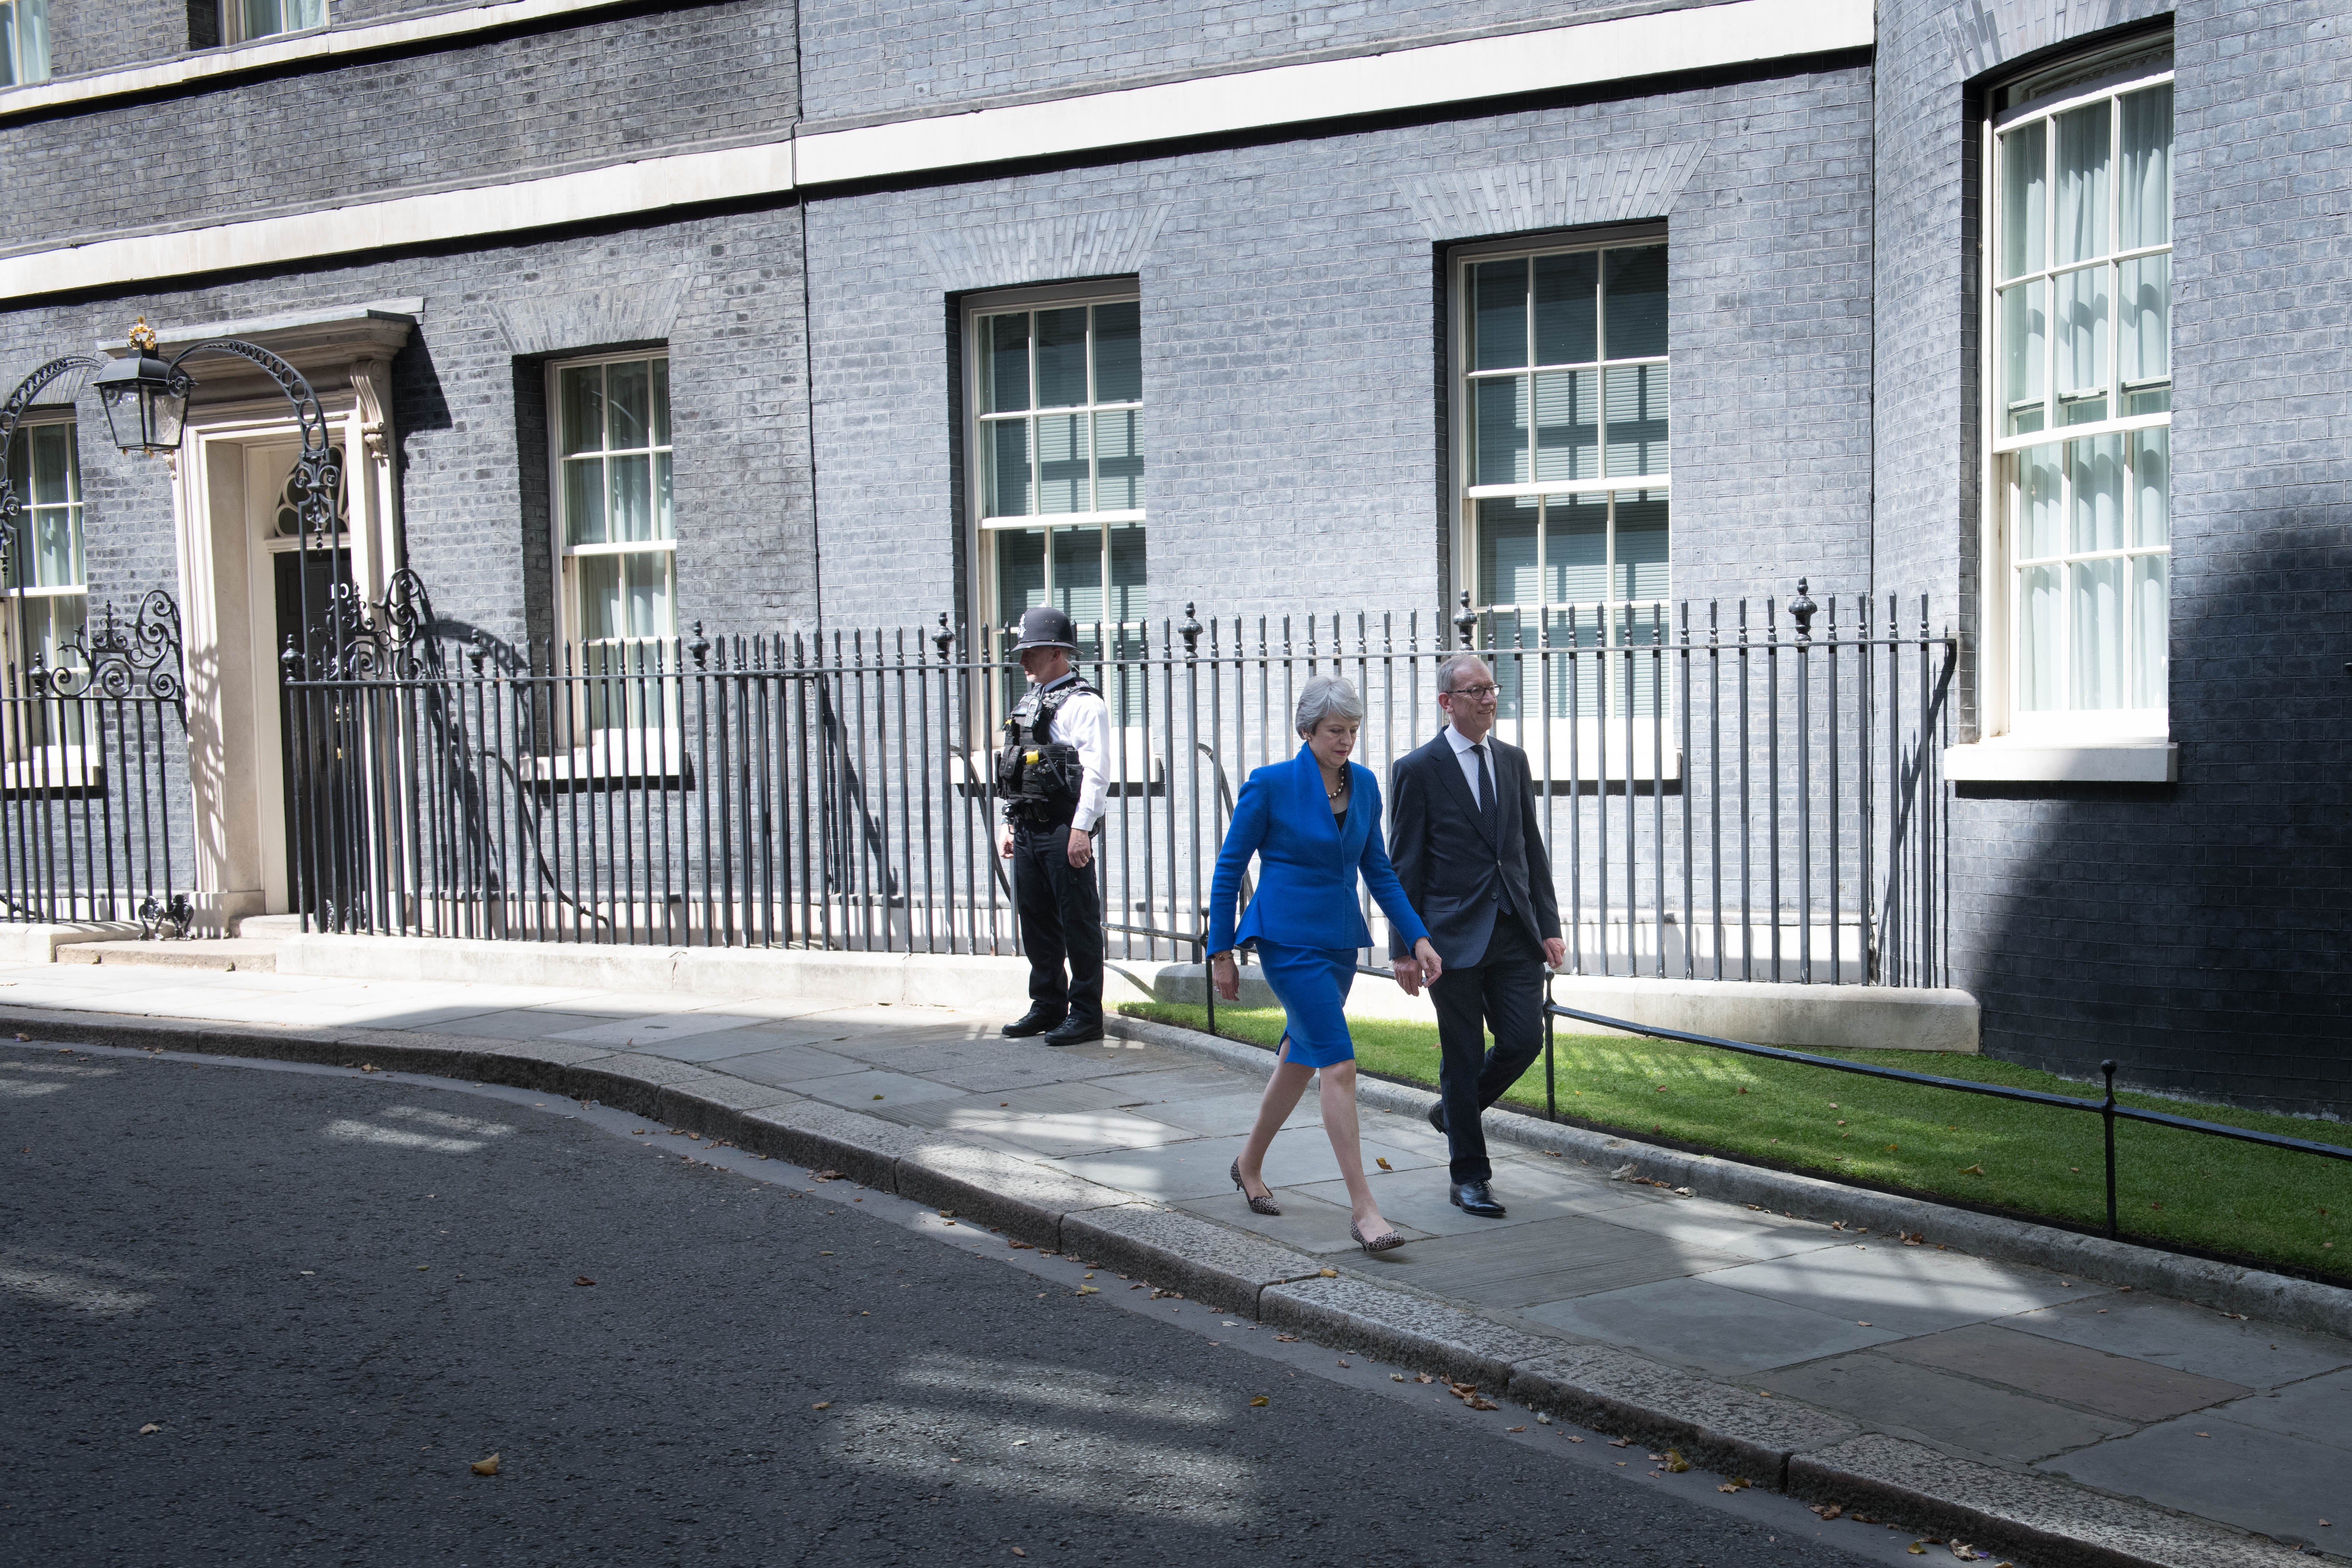 Outgoing prime minister Theresa May and her husband Philip leaving 10 Downing Street in 2019 (Stefan Rousseau/PA)